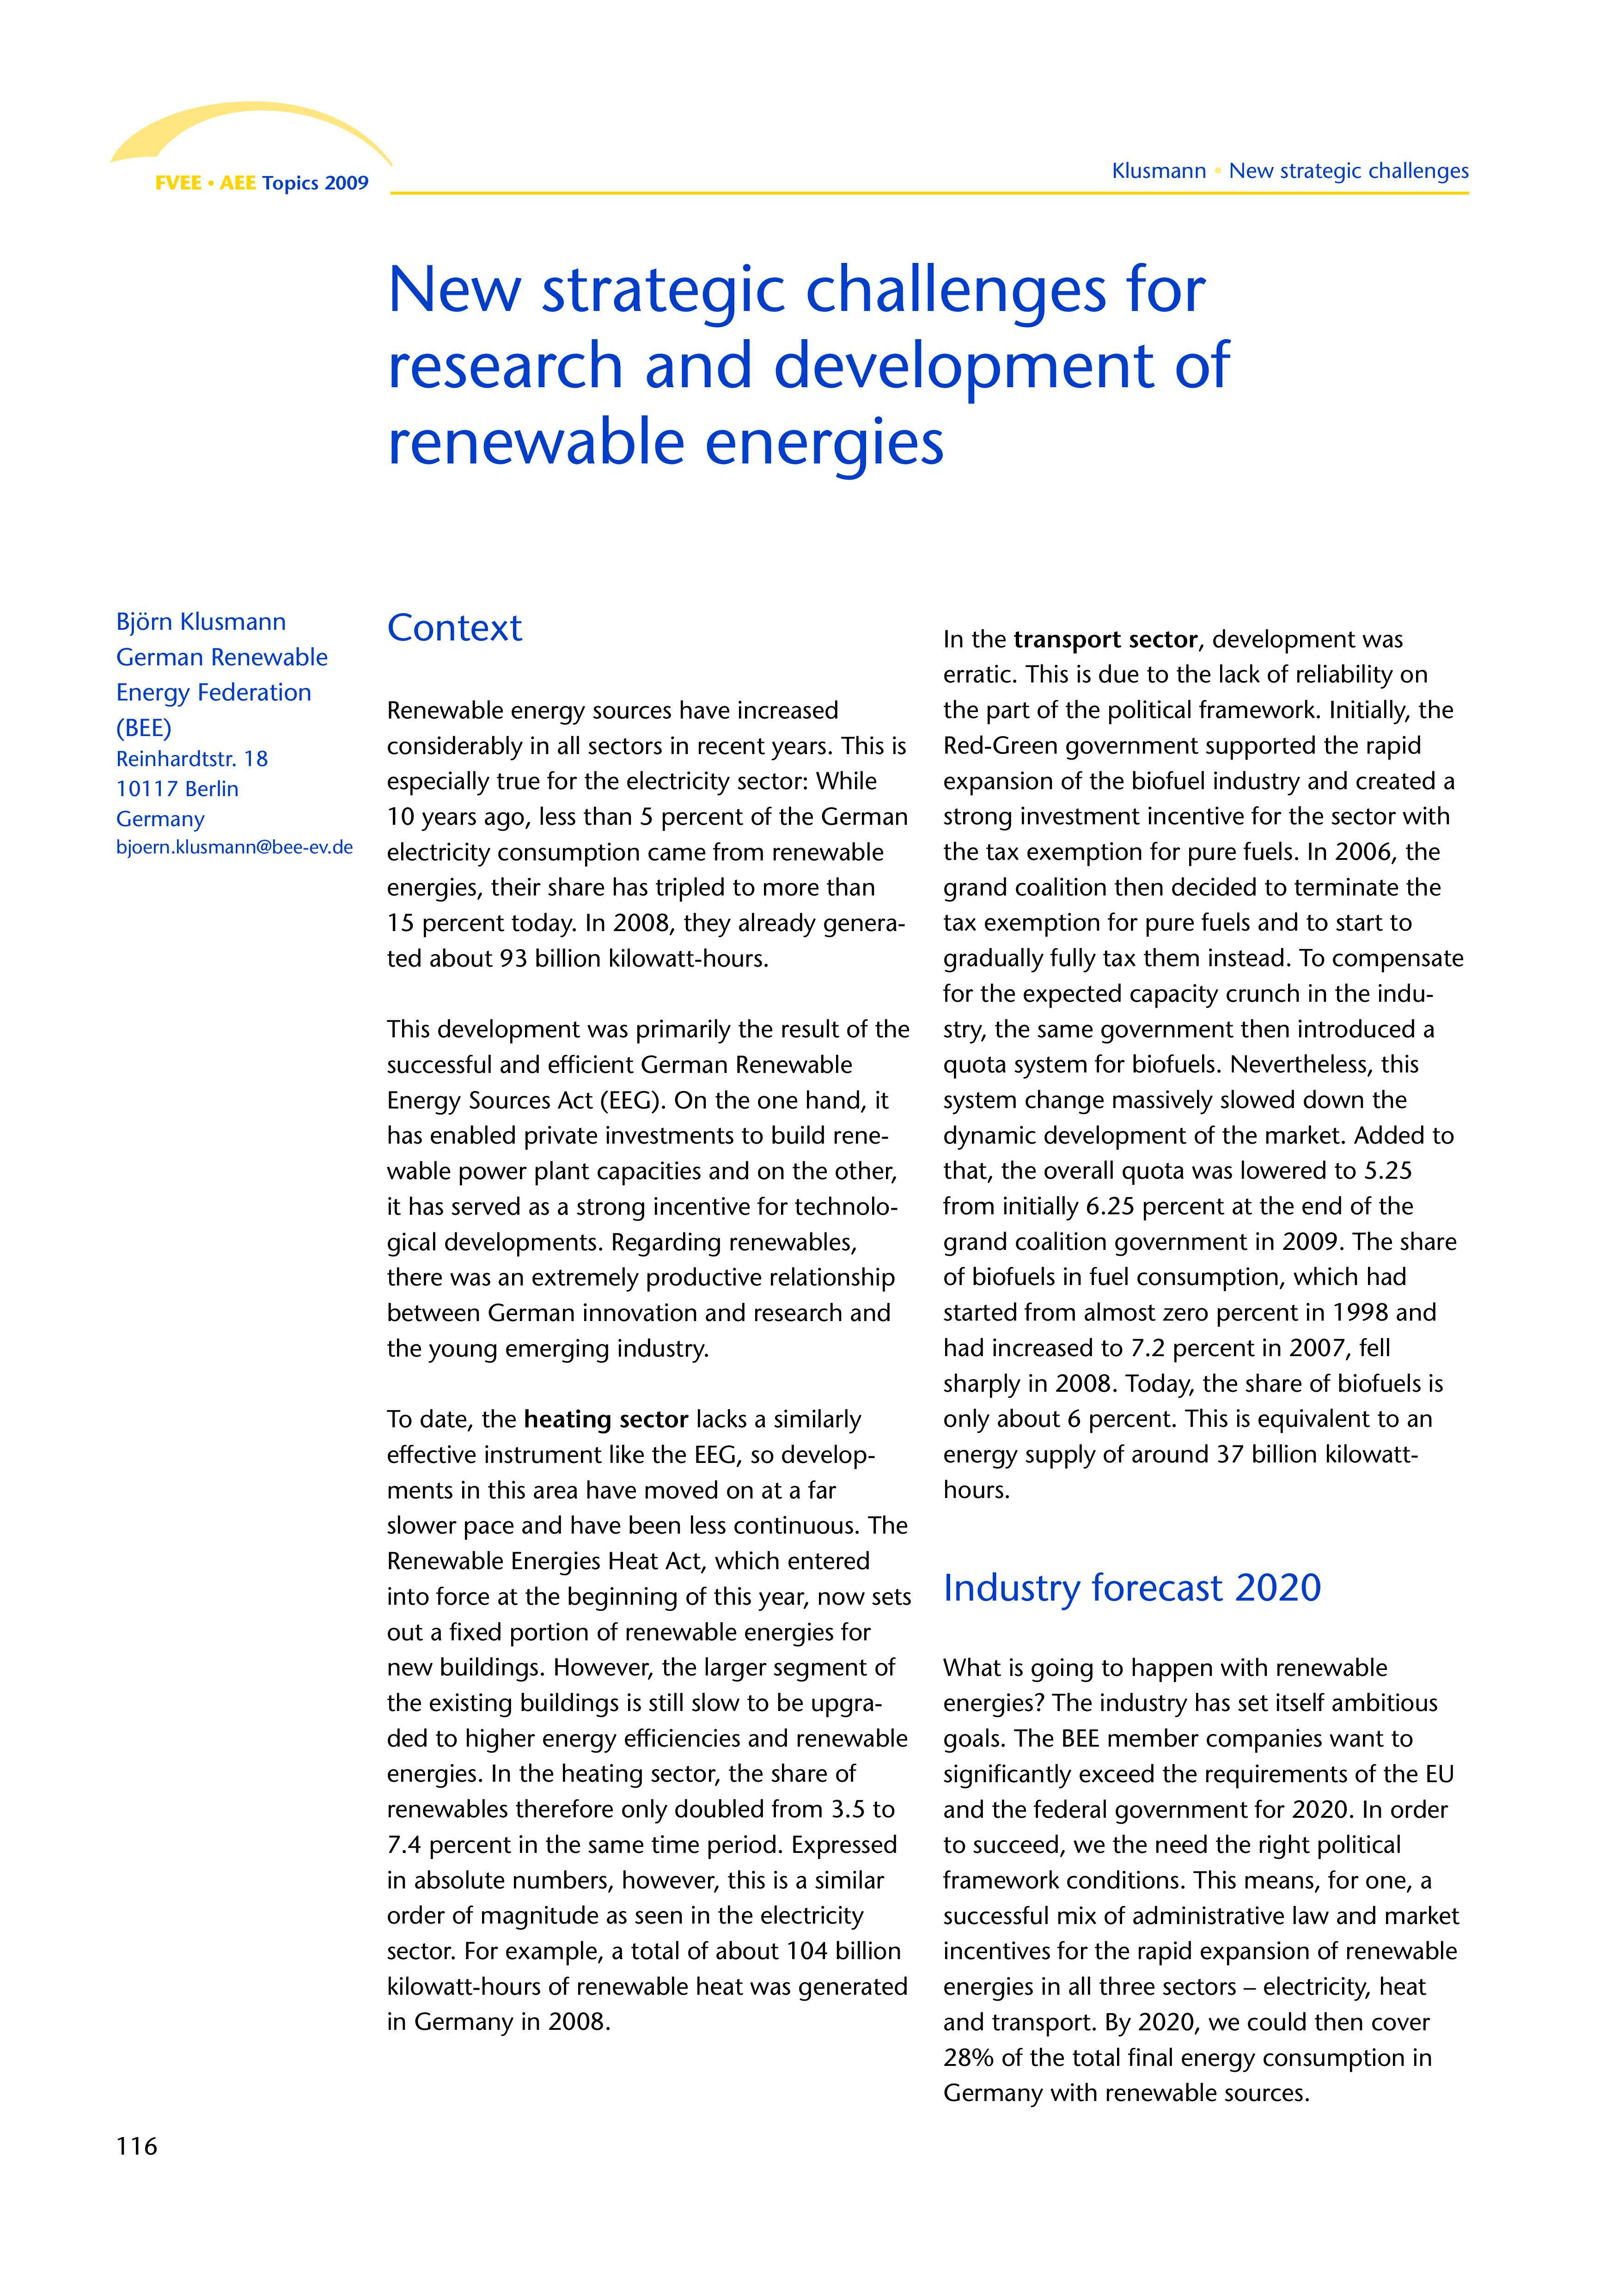 Topics 2009: Research for global markets for renewable energies